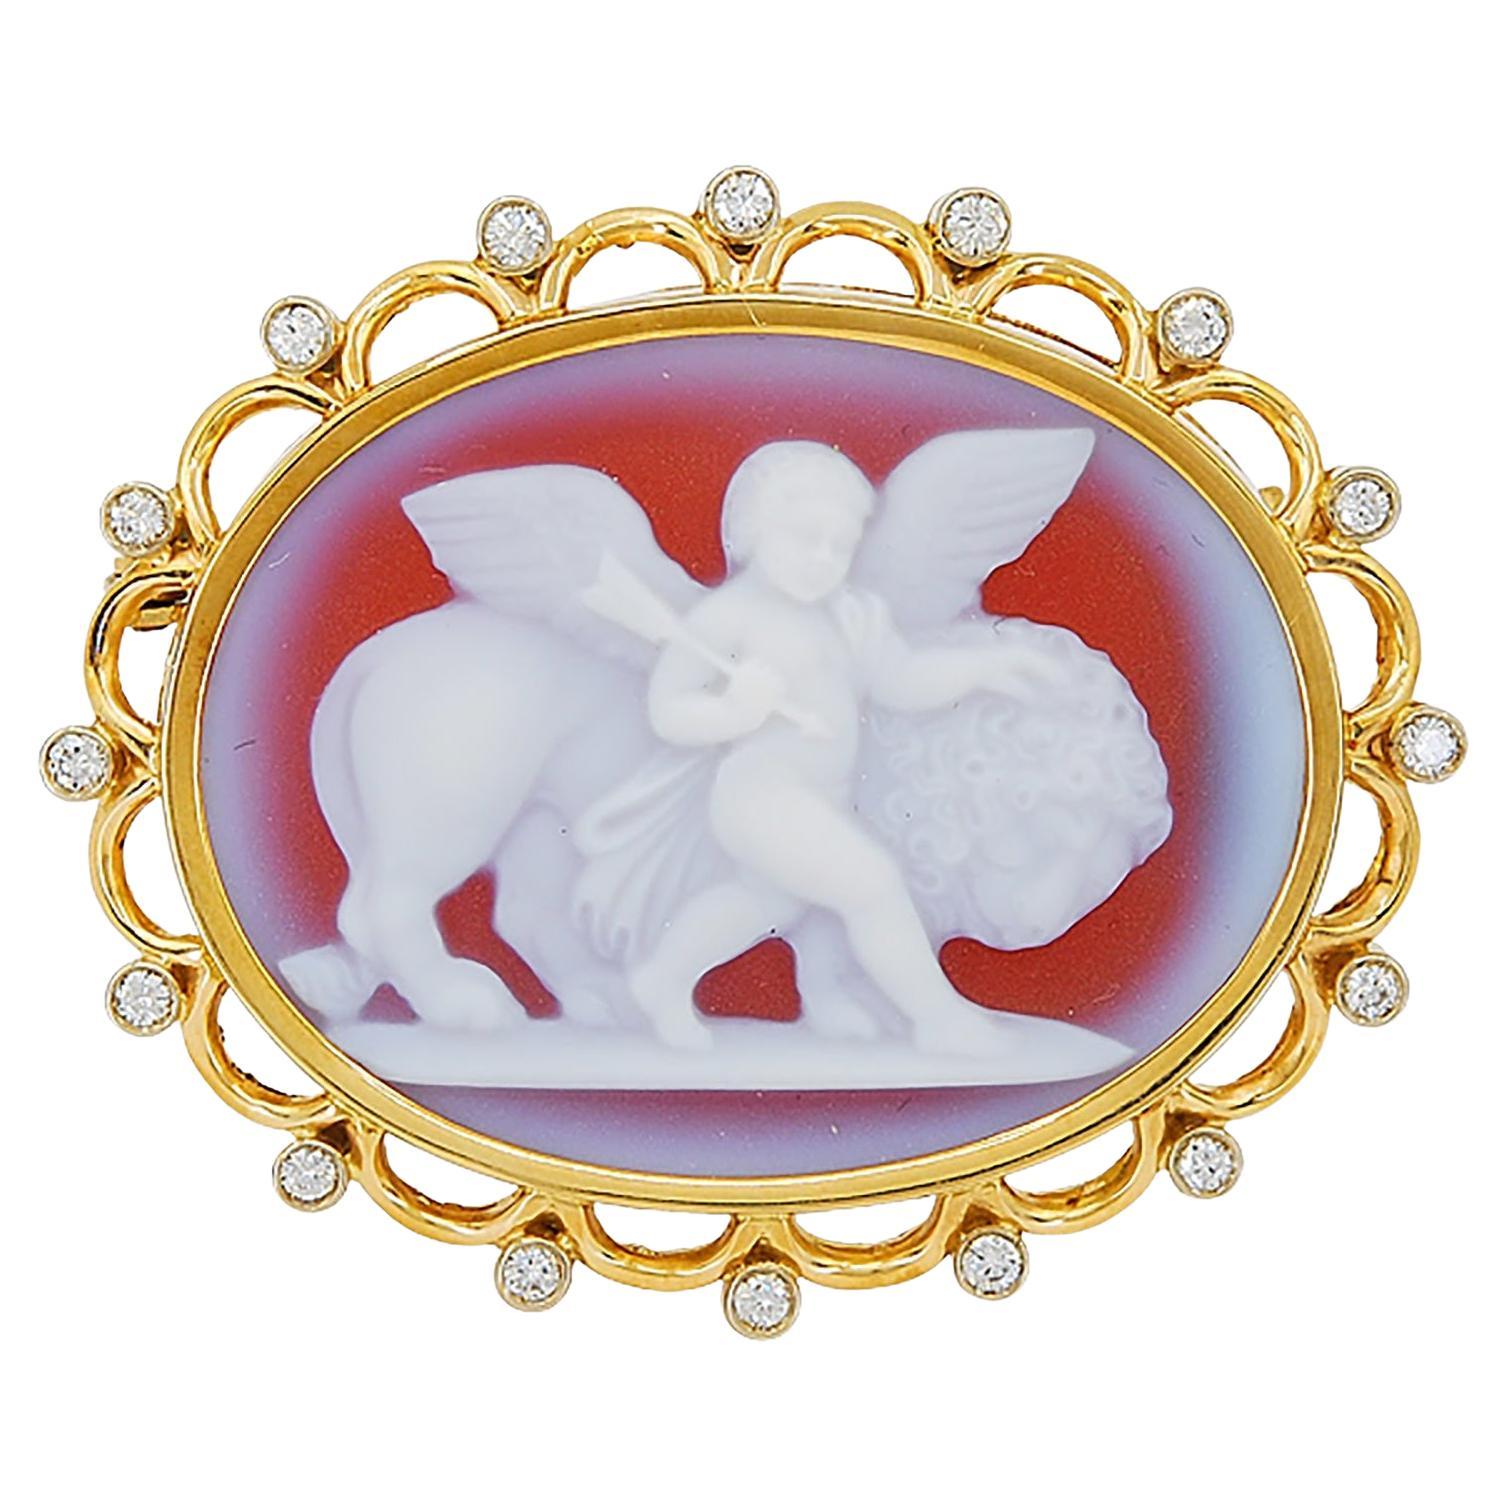 Nardi Love Conquers All Cameo Brooch For Sale